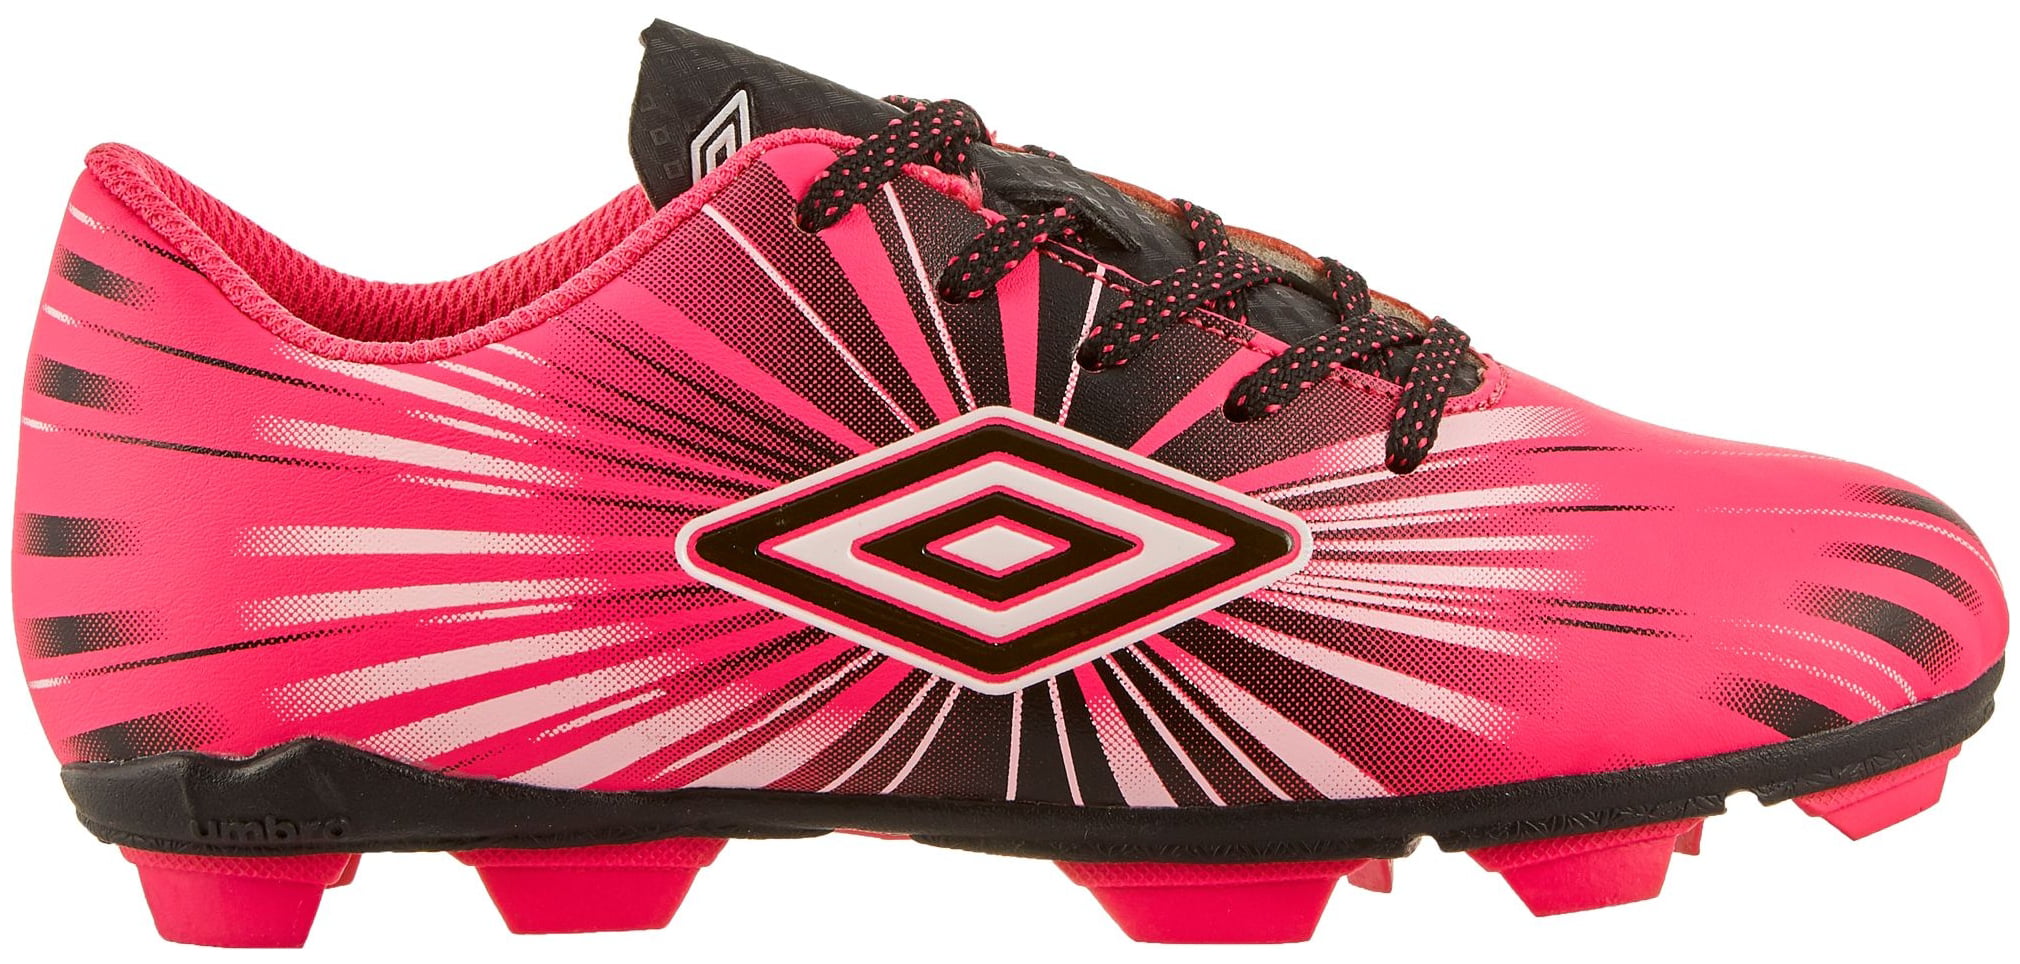 Details about   Umbro Arturo 3.0 Youth Boys Soccer Cleats 